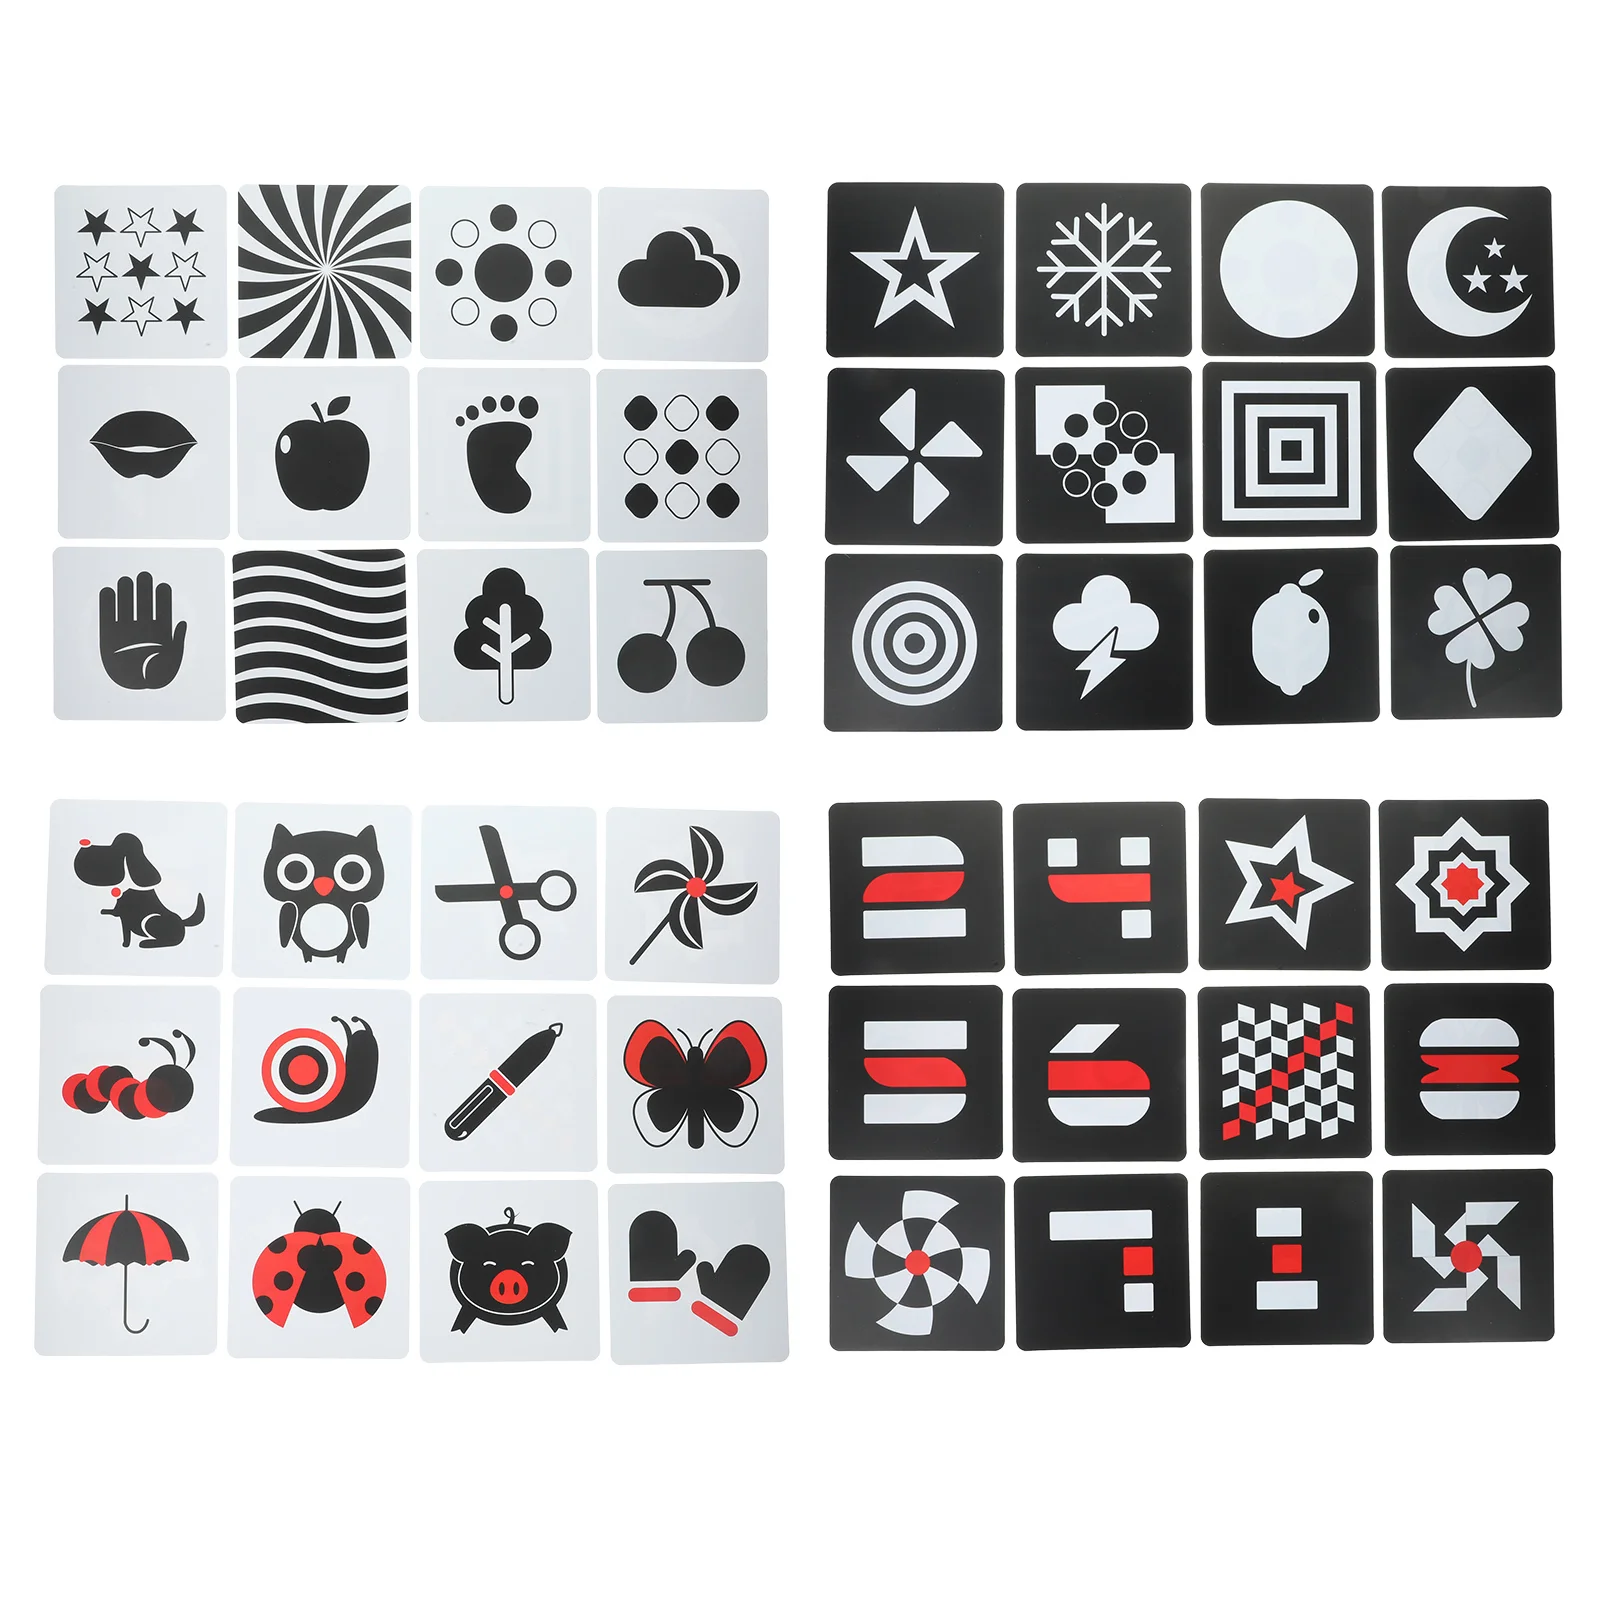 High Contrast Infant Toys Black White Visual Stimulation Cards Kids Activity Cards customized high quality etch cut out hotel club nfc metal business cards